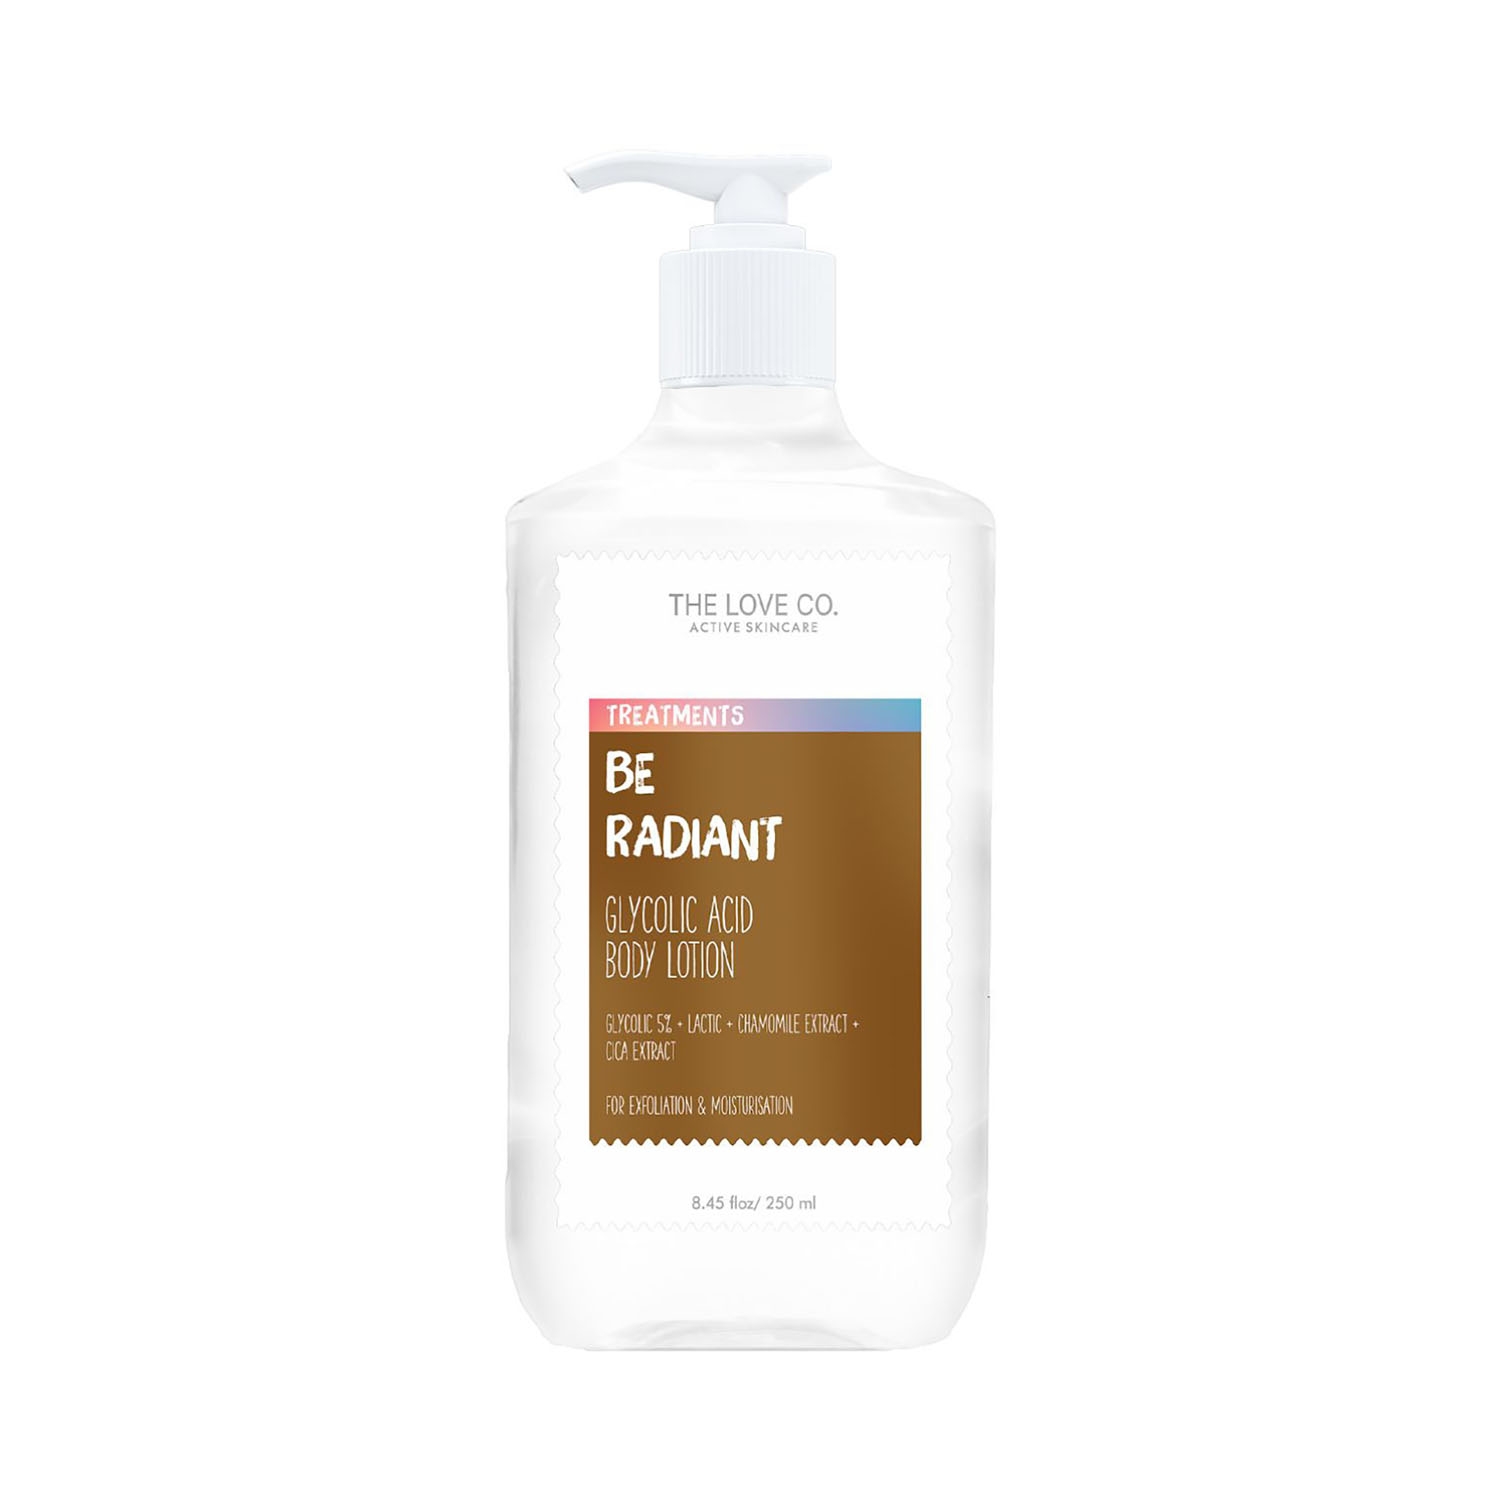 THE LOVE CO. | THE LOVE CO. Be Radiant Glycolic Acid Body Lotion (250ml)